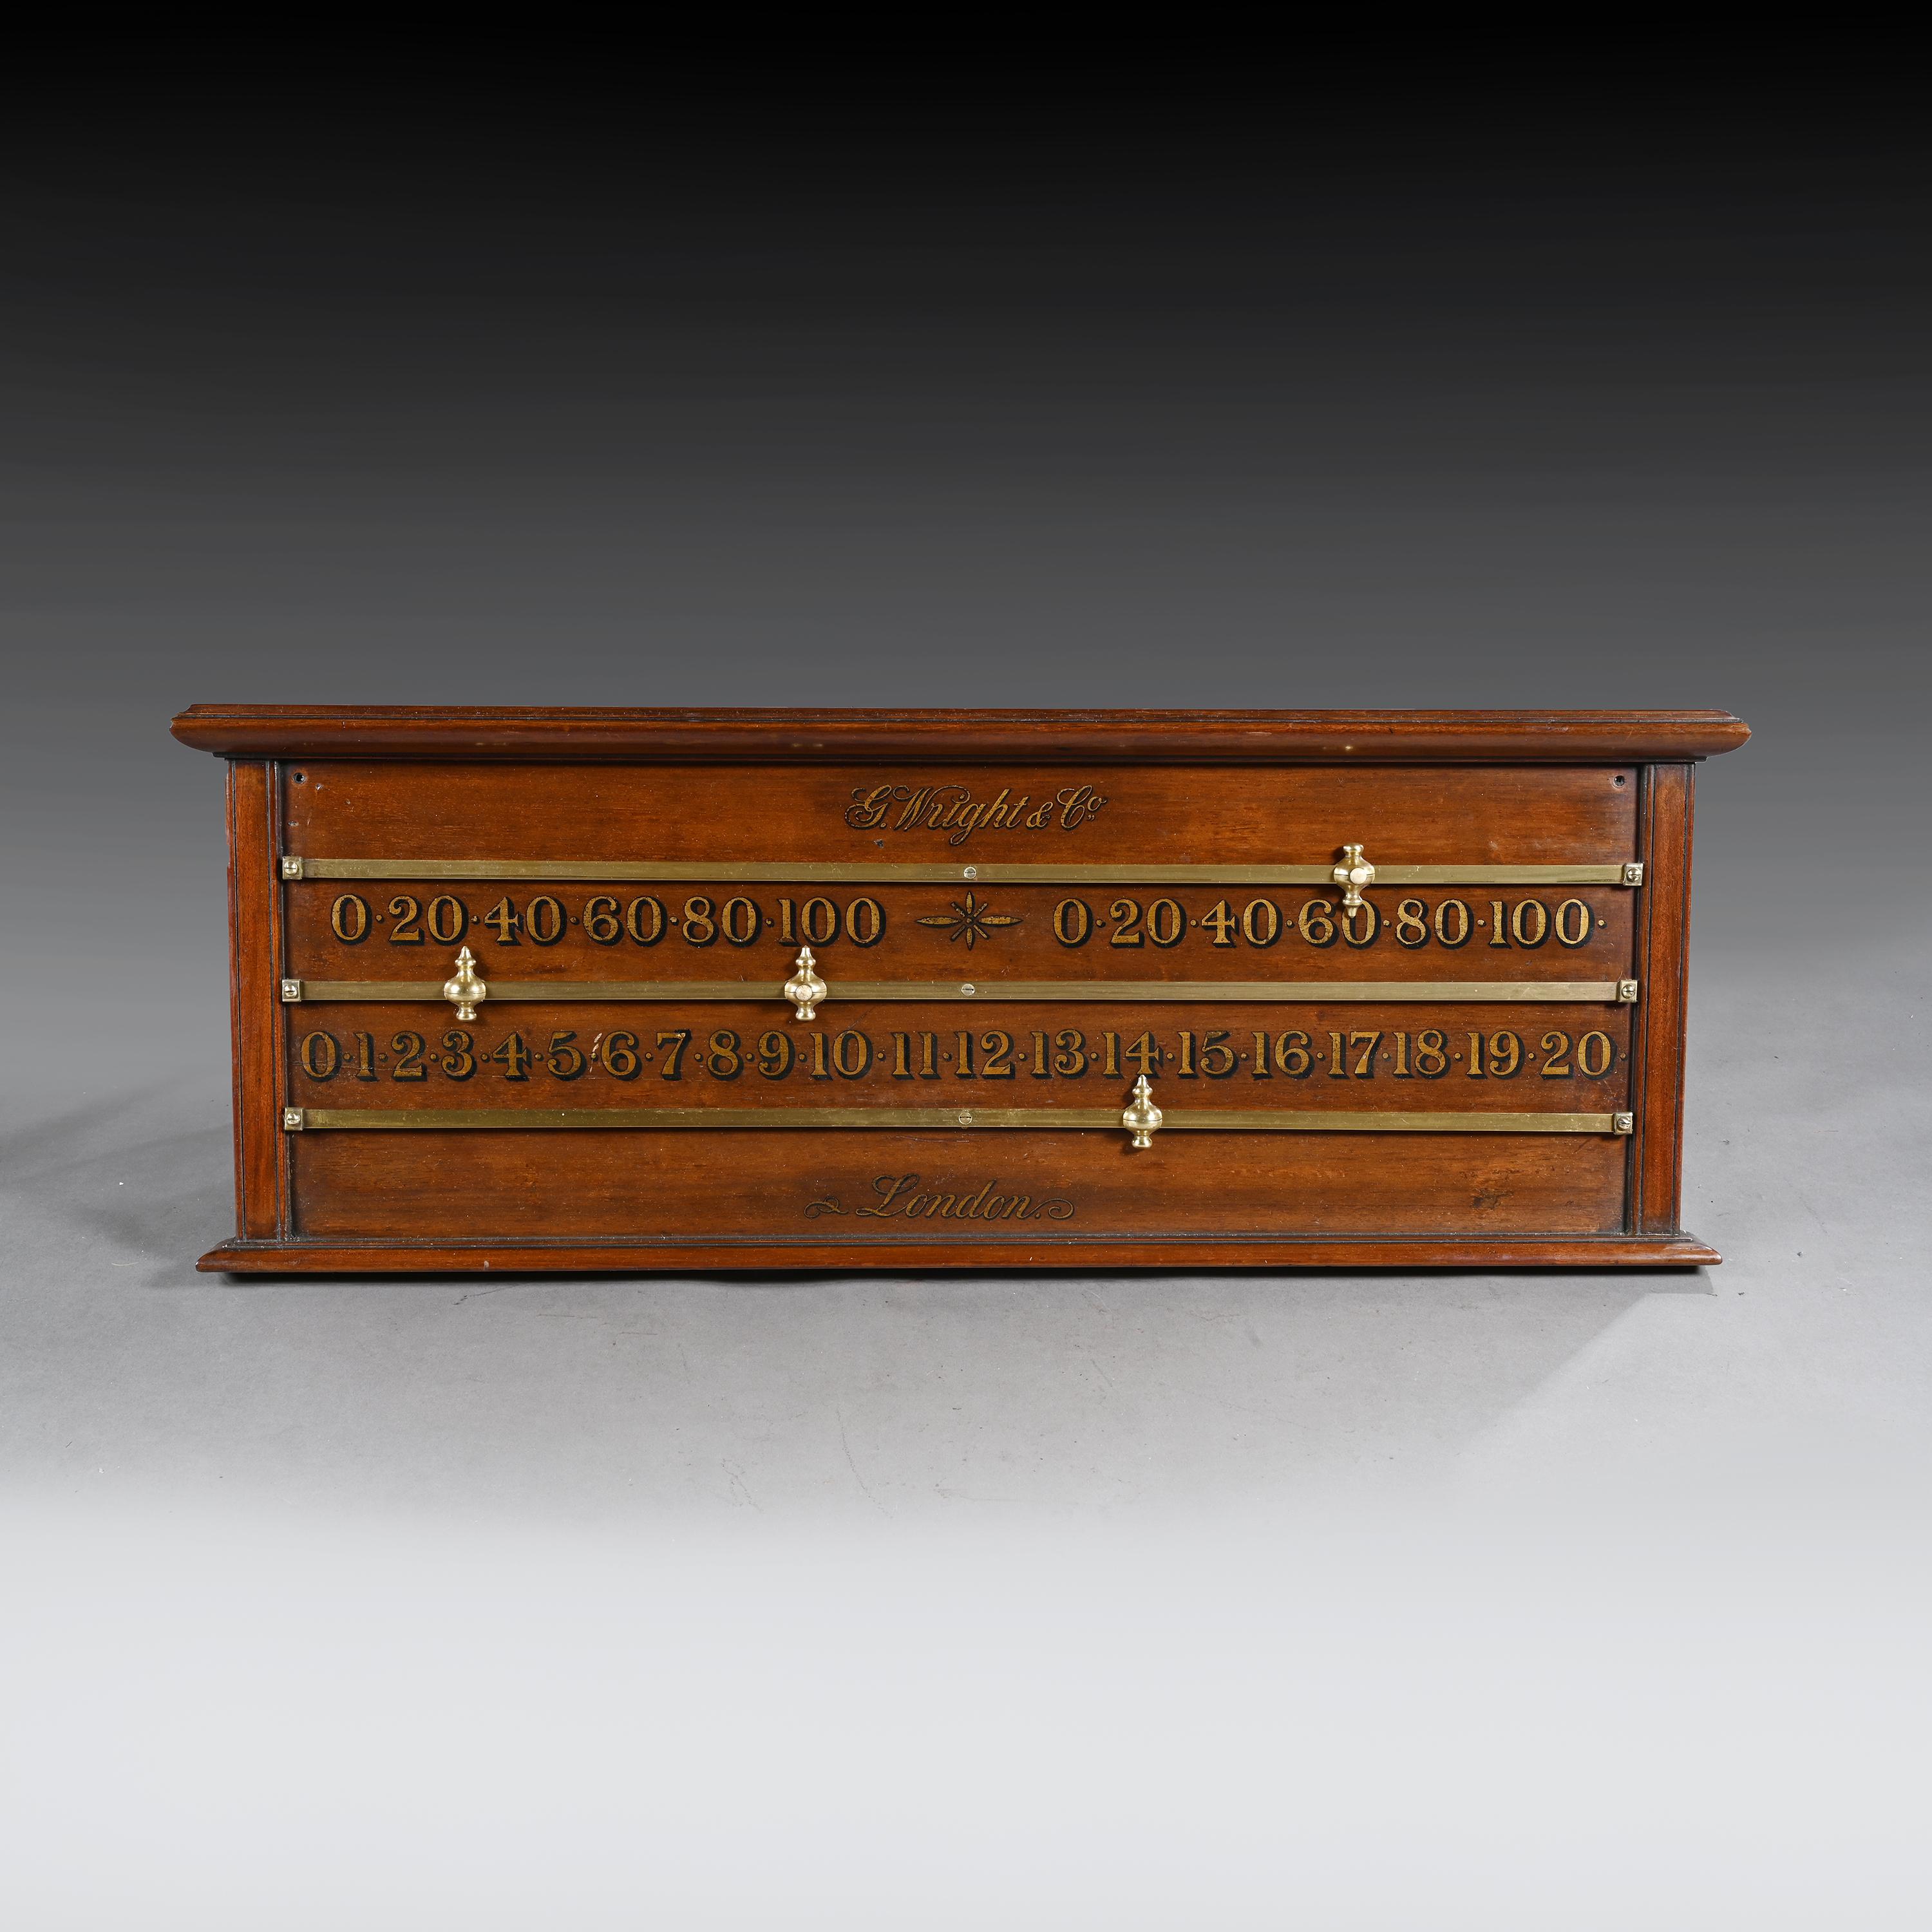 Good quality Edwardian mahogany billiards or snooker scoreboard by George Wright of London.

English, circa 1900.

The mahogany frame having gold painted lettering and numerals with brasss runners and markers.

Dimensions:

Width 35 1/2